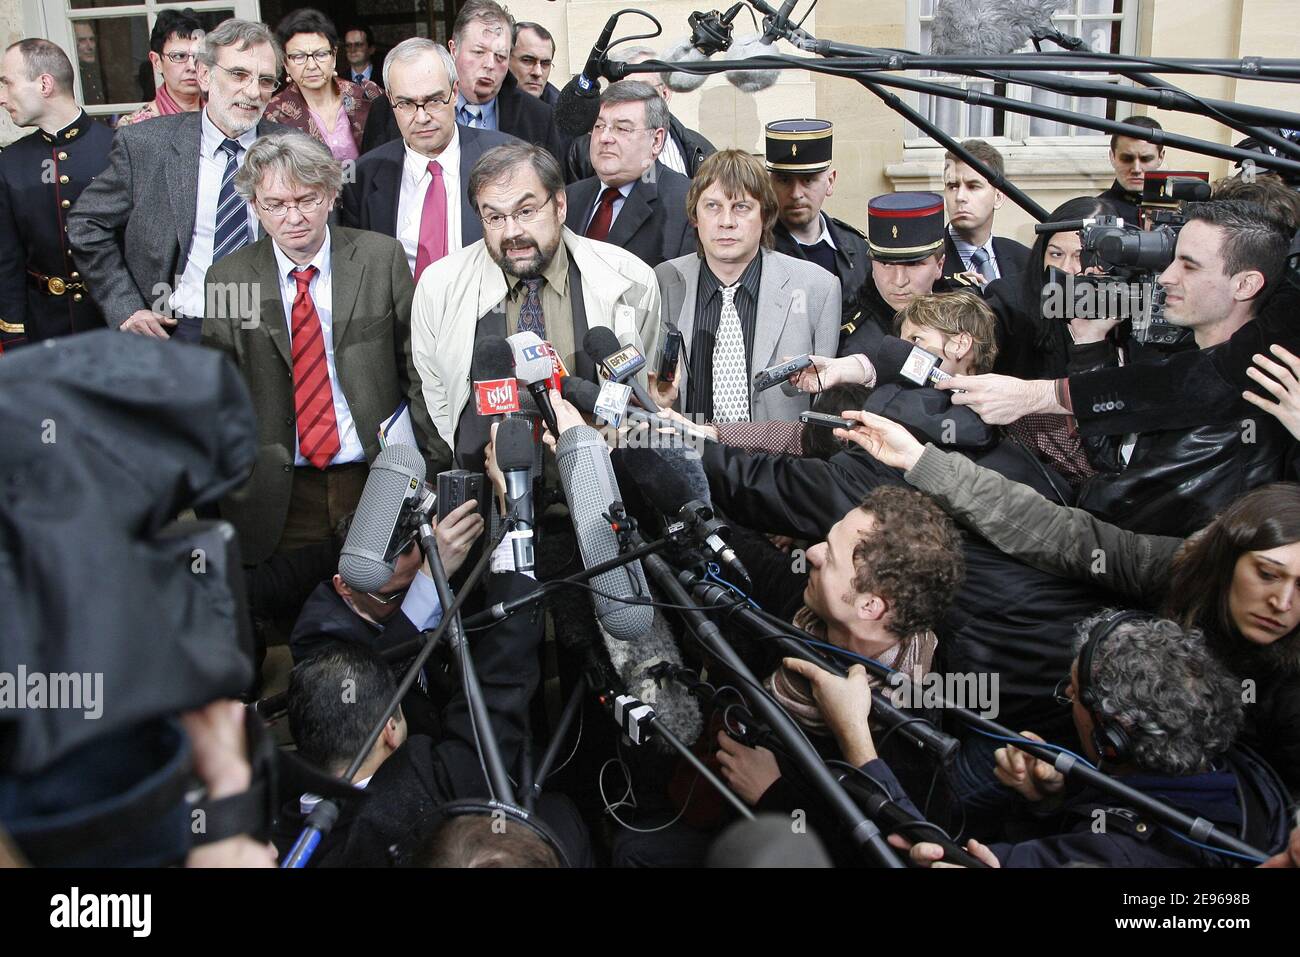 Unionists Bernard Thibault (CGT) (R), Francois Chereque (C), Jean-Claude Mailly (FO) (L), Jacques Voisin (2nd rowL) (CFTC), et Jean-Marc Icard (2nd Row C) (CFE-CGC) answer to journalists as they leave a meeting with French Prime Minister Dominique de Villepin in Paris, France, March 24, 2006. The prime minister met with unions for just over one hour, with both sides refusing to cede any ground. The unions say they will not hold talks with the government unless the law is revoked. De Villlepin has said he won't withdraw, suspend or change the law.. Photo by Mehdi Taamallah/ABACAPRESS.COM Stock Photo